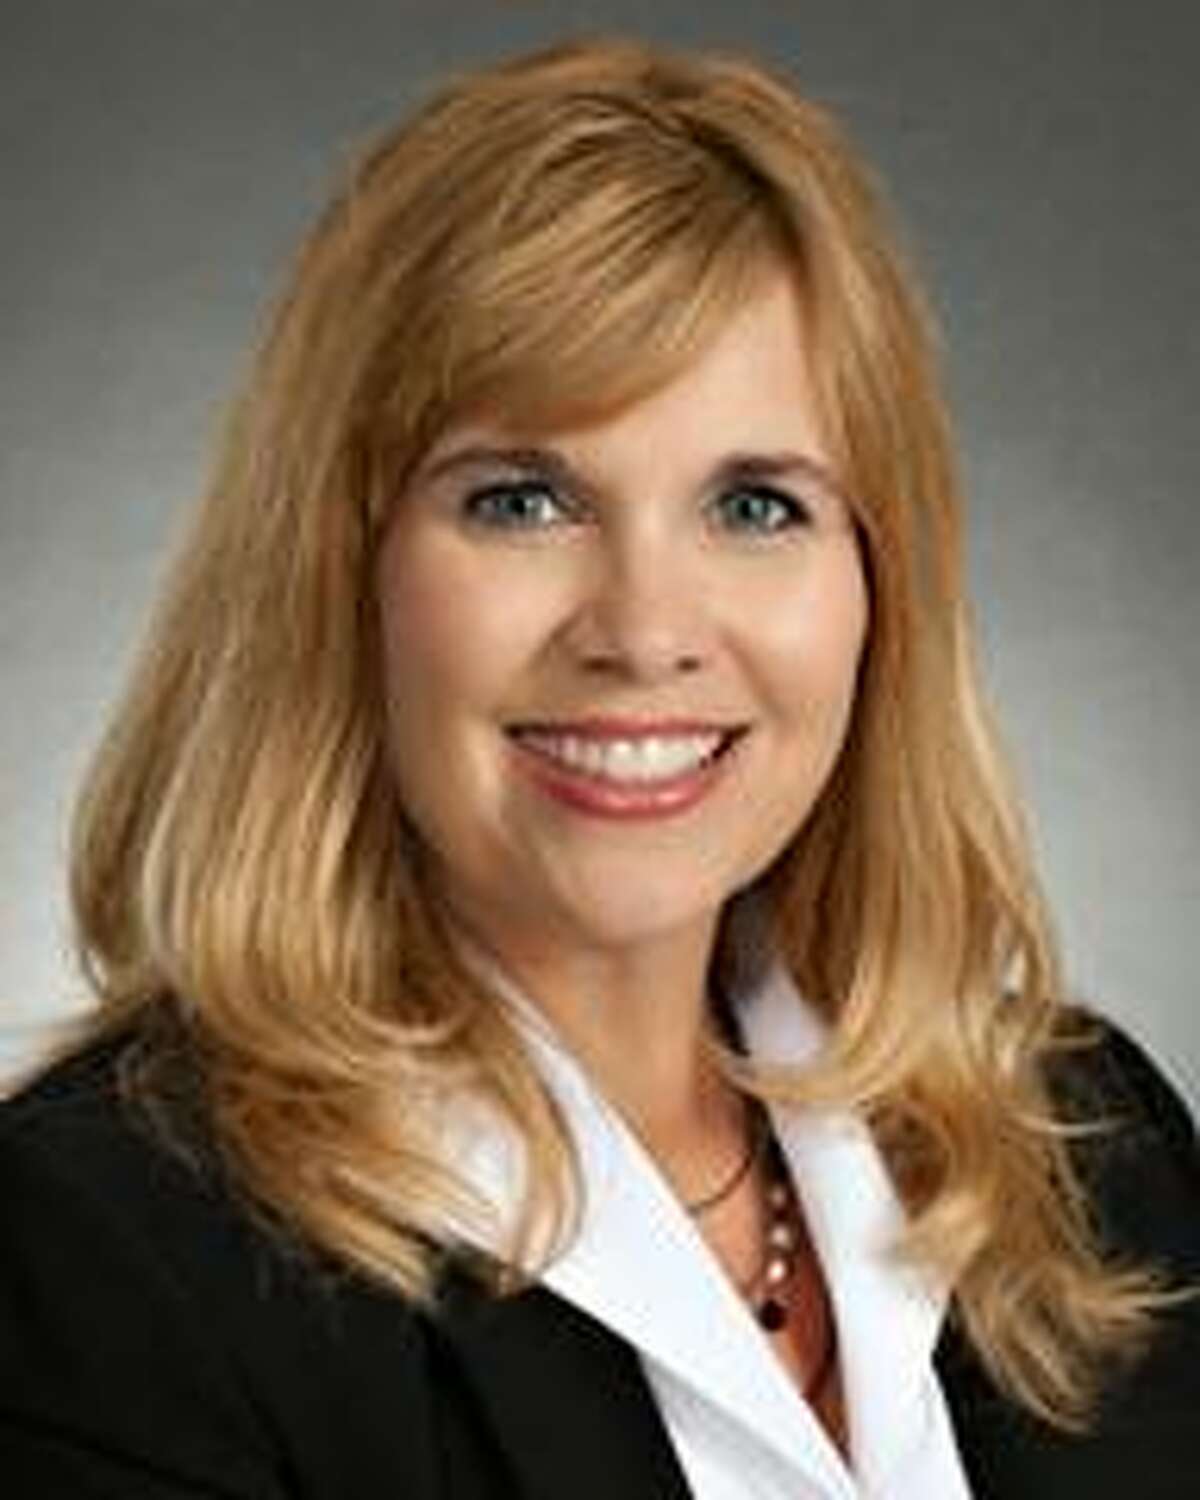 Missouri City attorney Kristin Tassin, who is challenging the longtime Republican state senator, was recently appointed to a gubernatorial special advisory commission on special education.